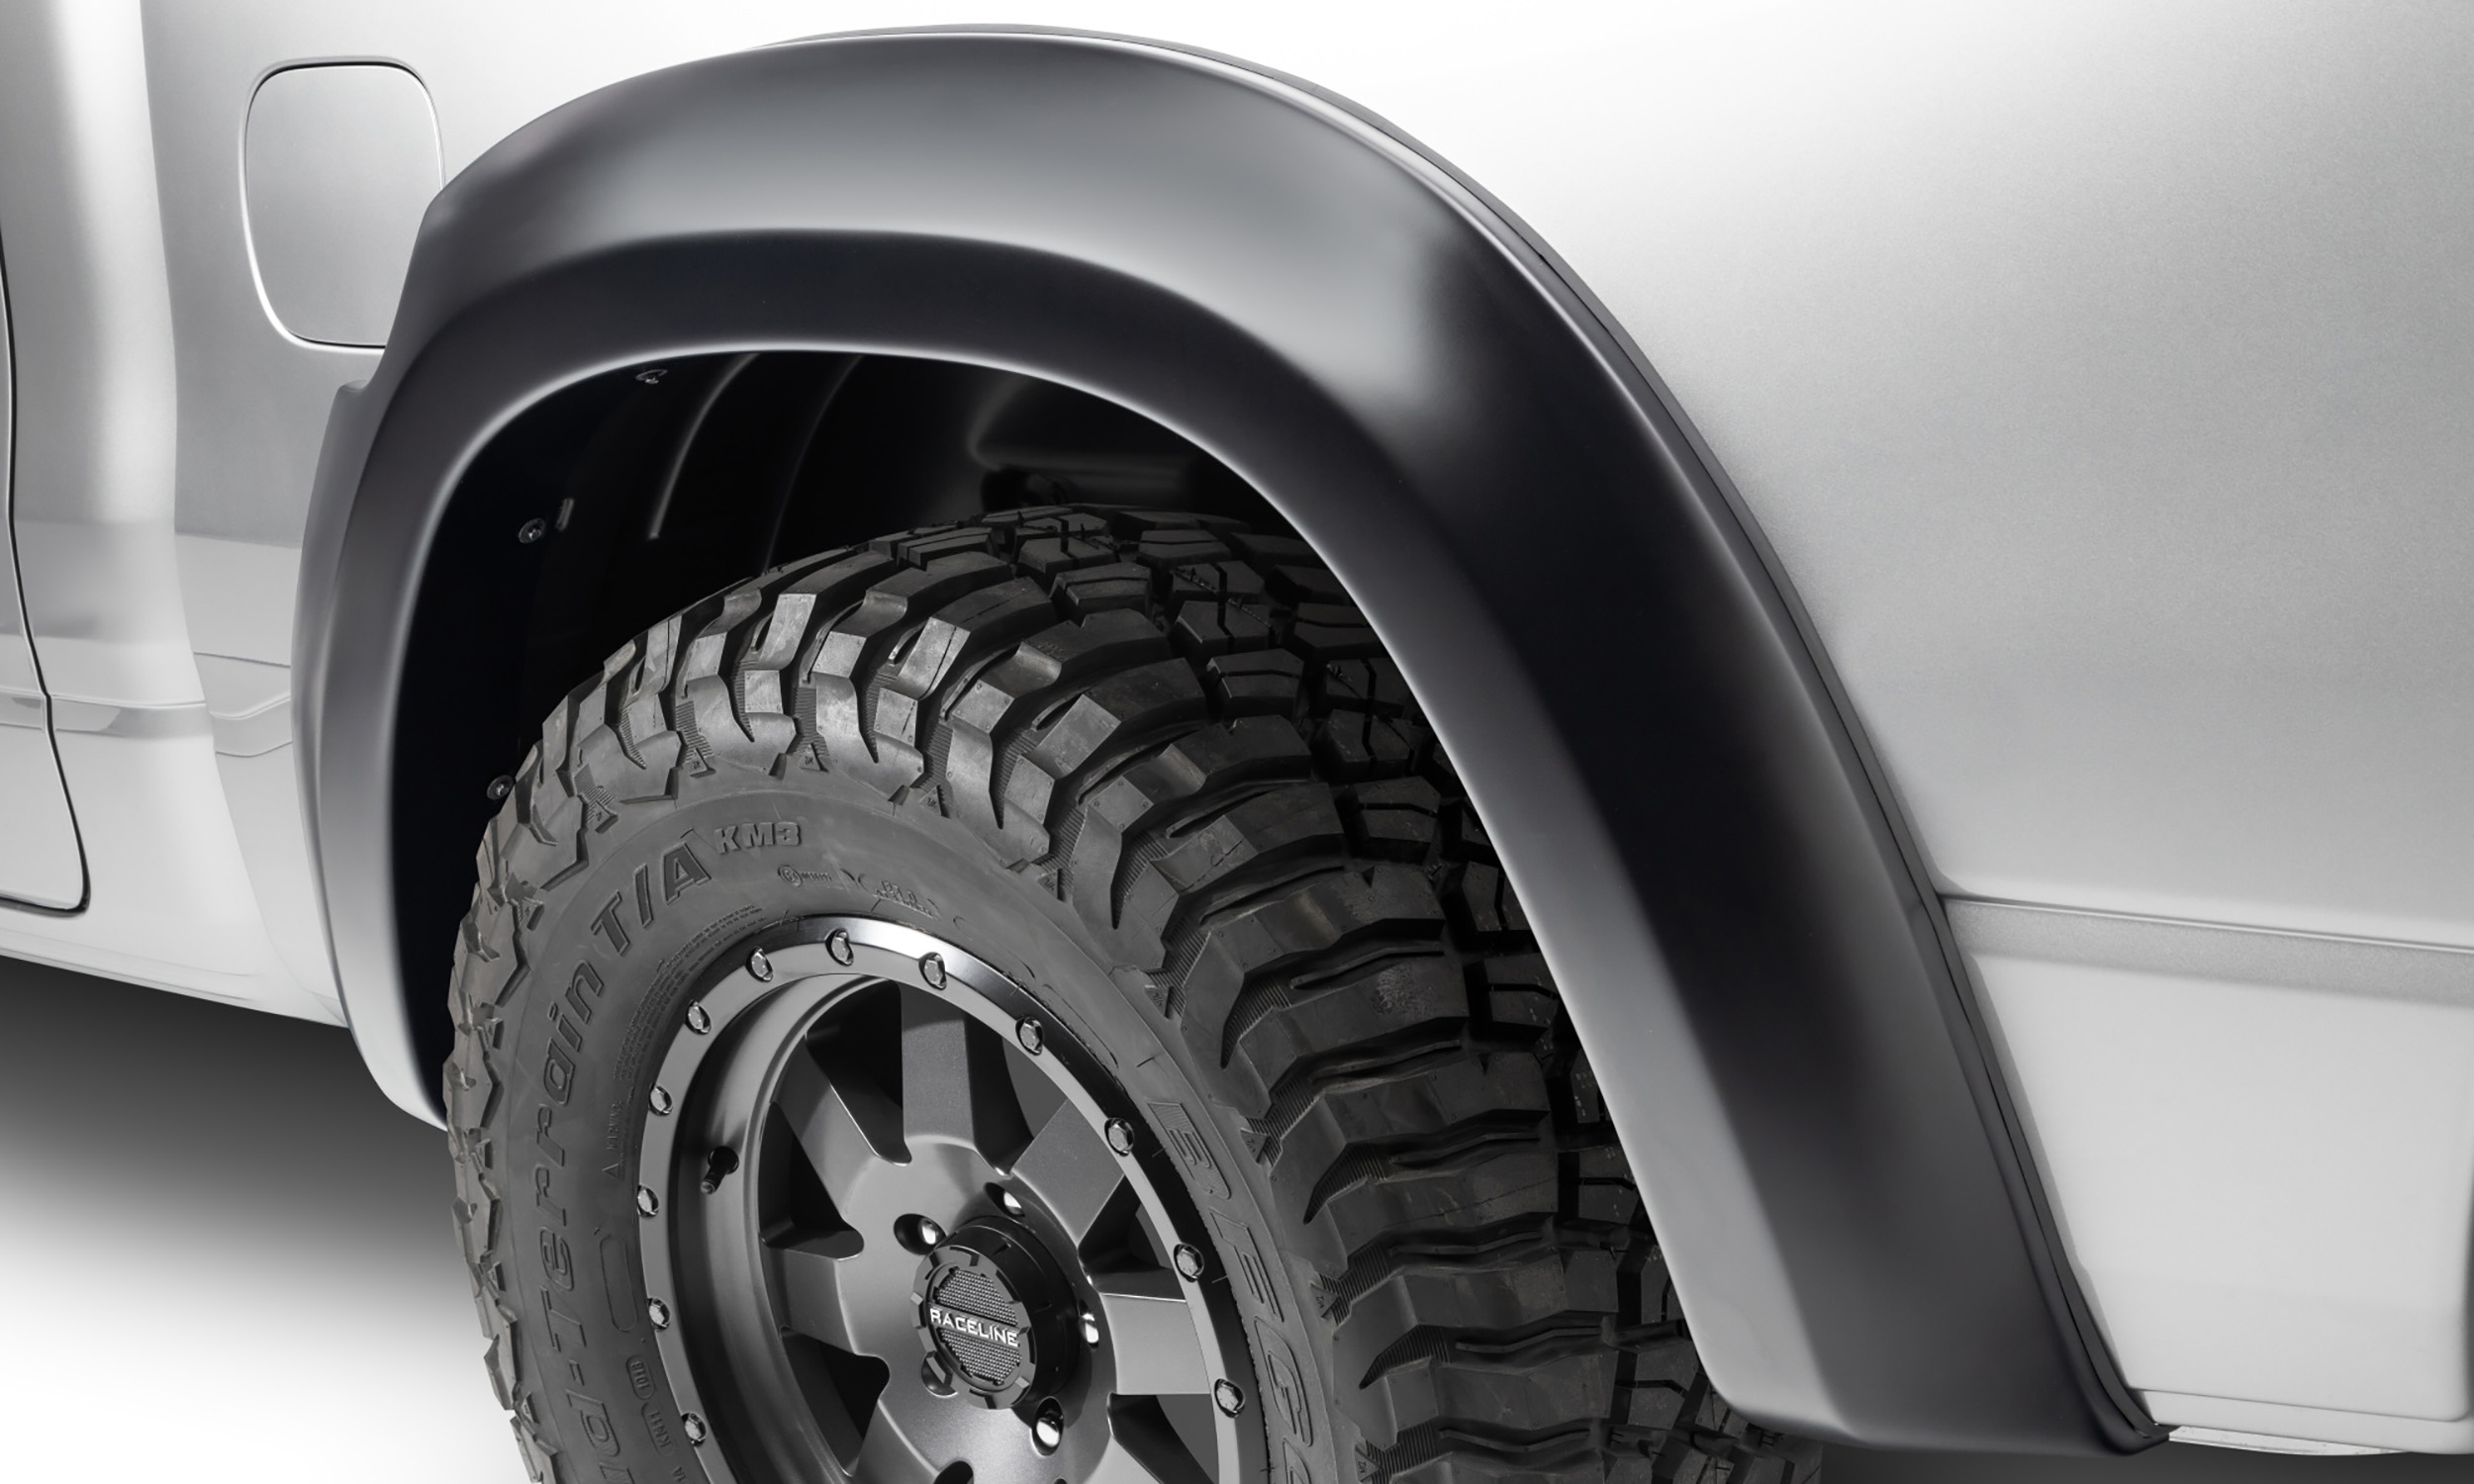 Bushwacker 50058-02 Black Extend-A-Fender Style Smooth Finish Rear Fender Flares for 2019-2022 Ram 1500; Will not fit Rebel and TRX models